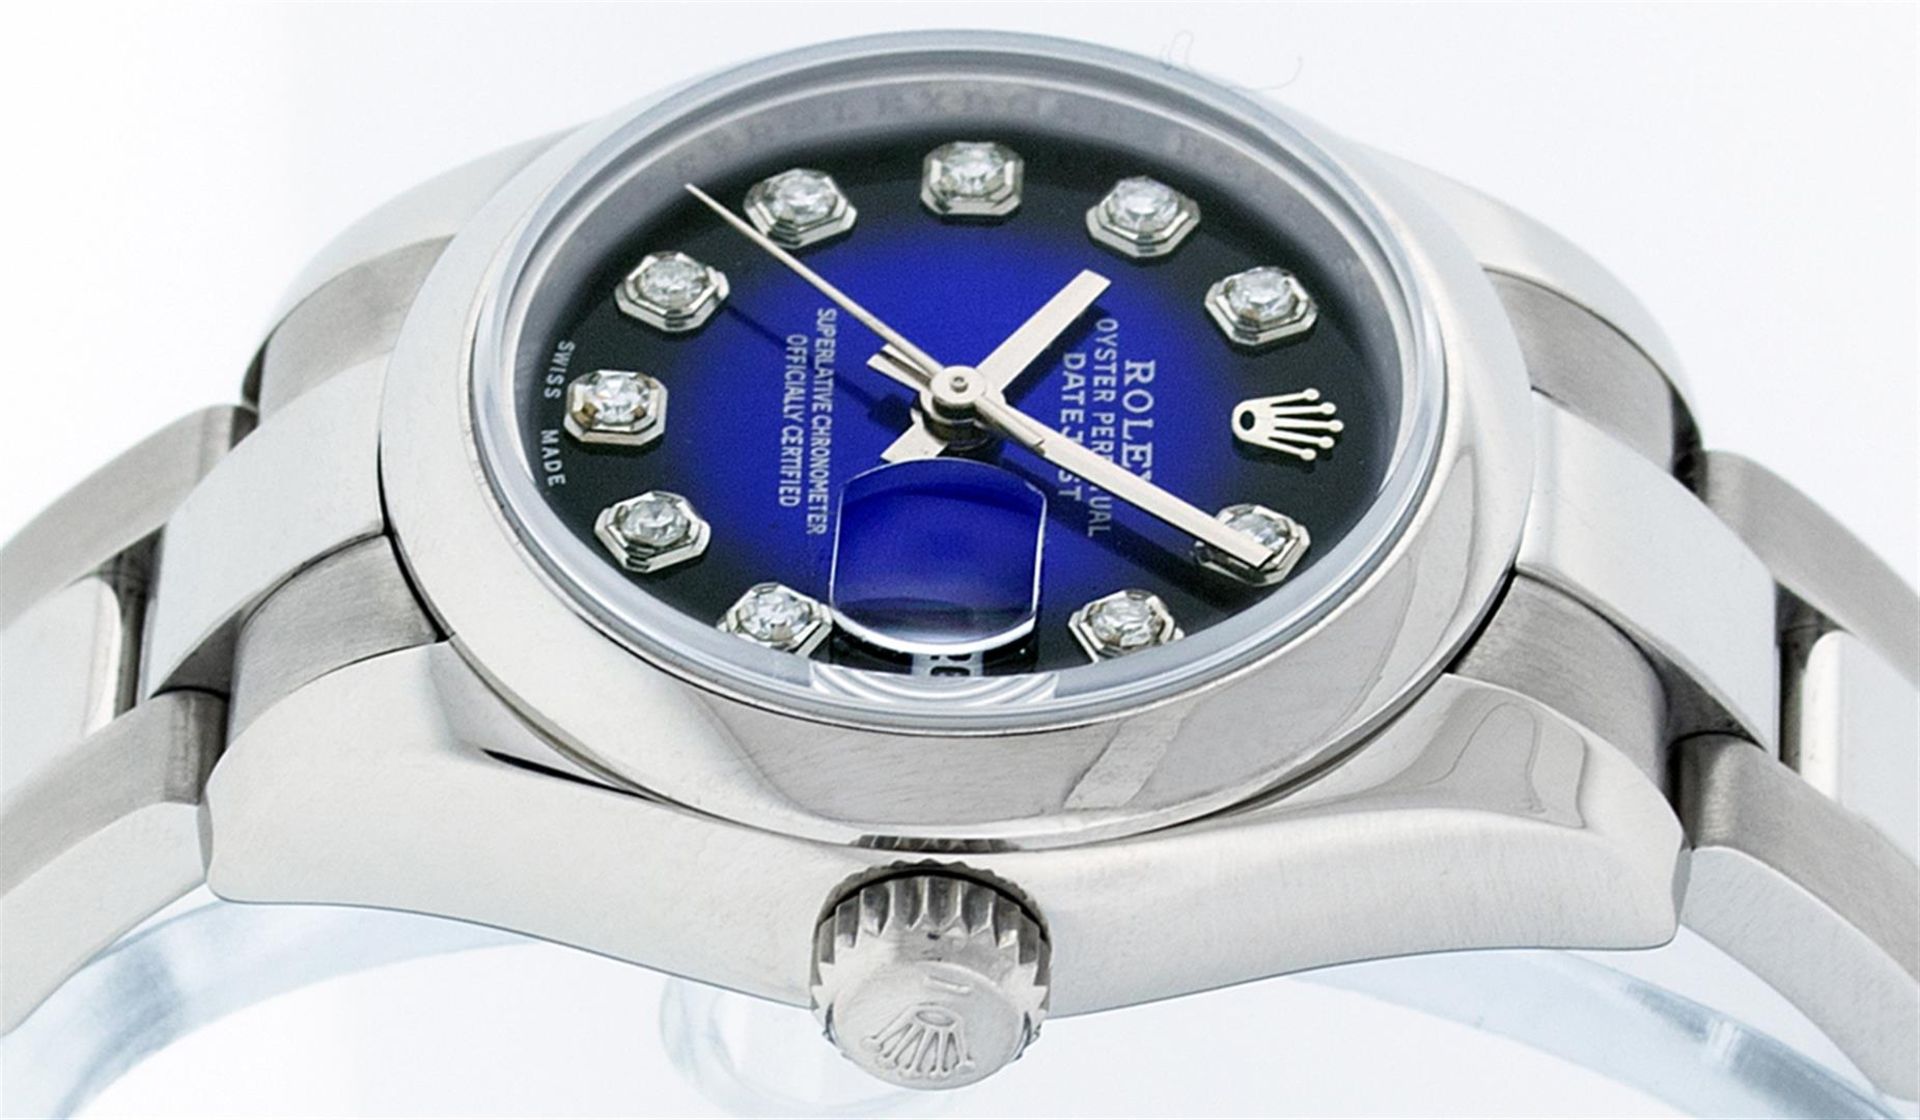 Rolex Ladies New Style Quickset Datejust Blue Diamond Oyster Perpetual Datejust - Image 2 of 9